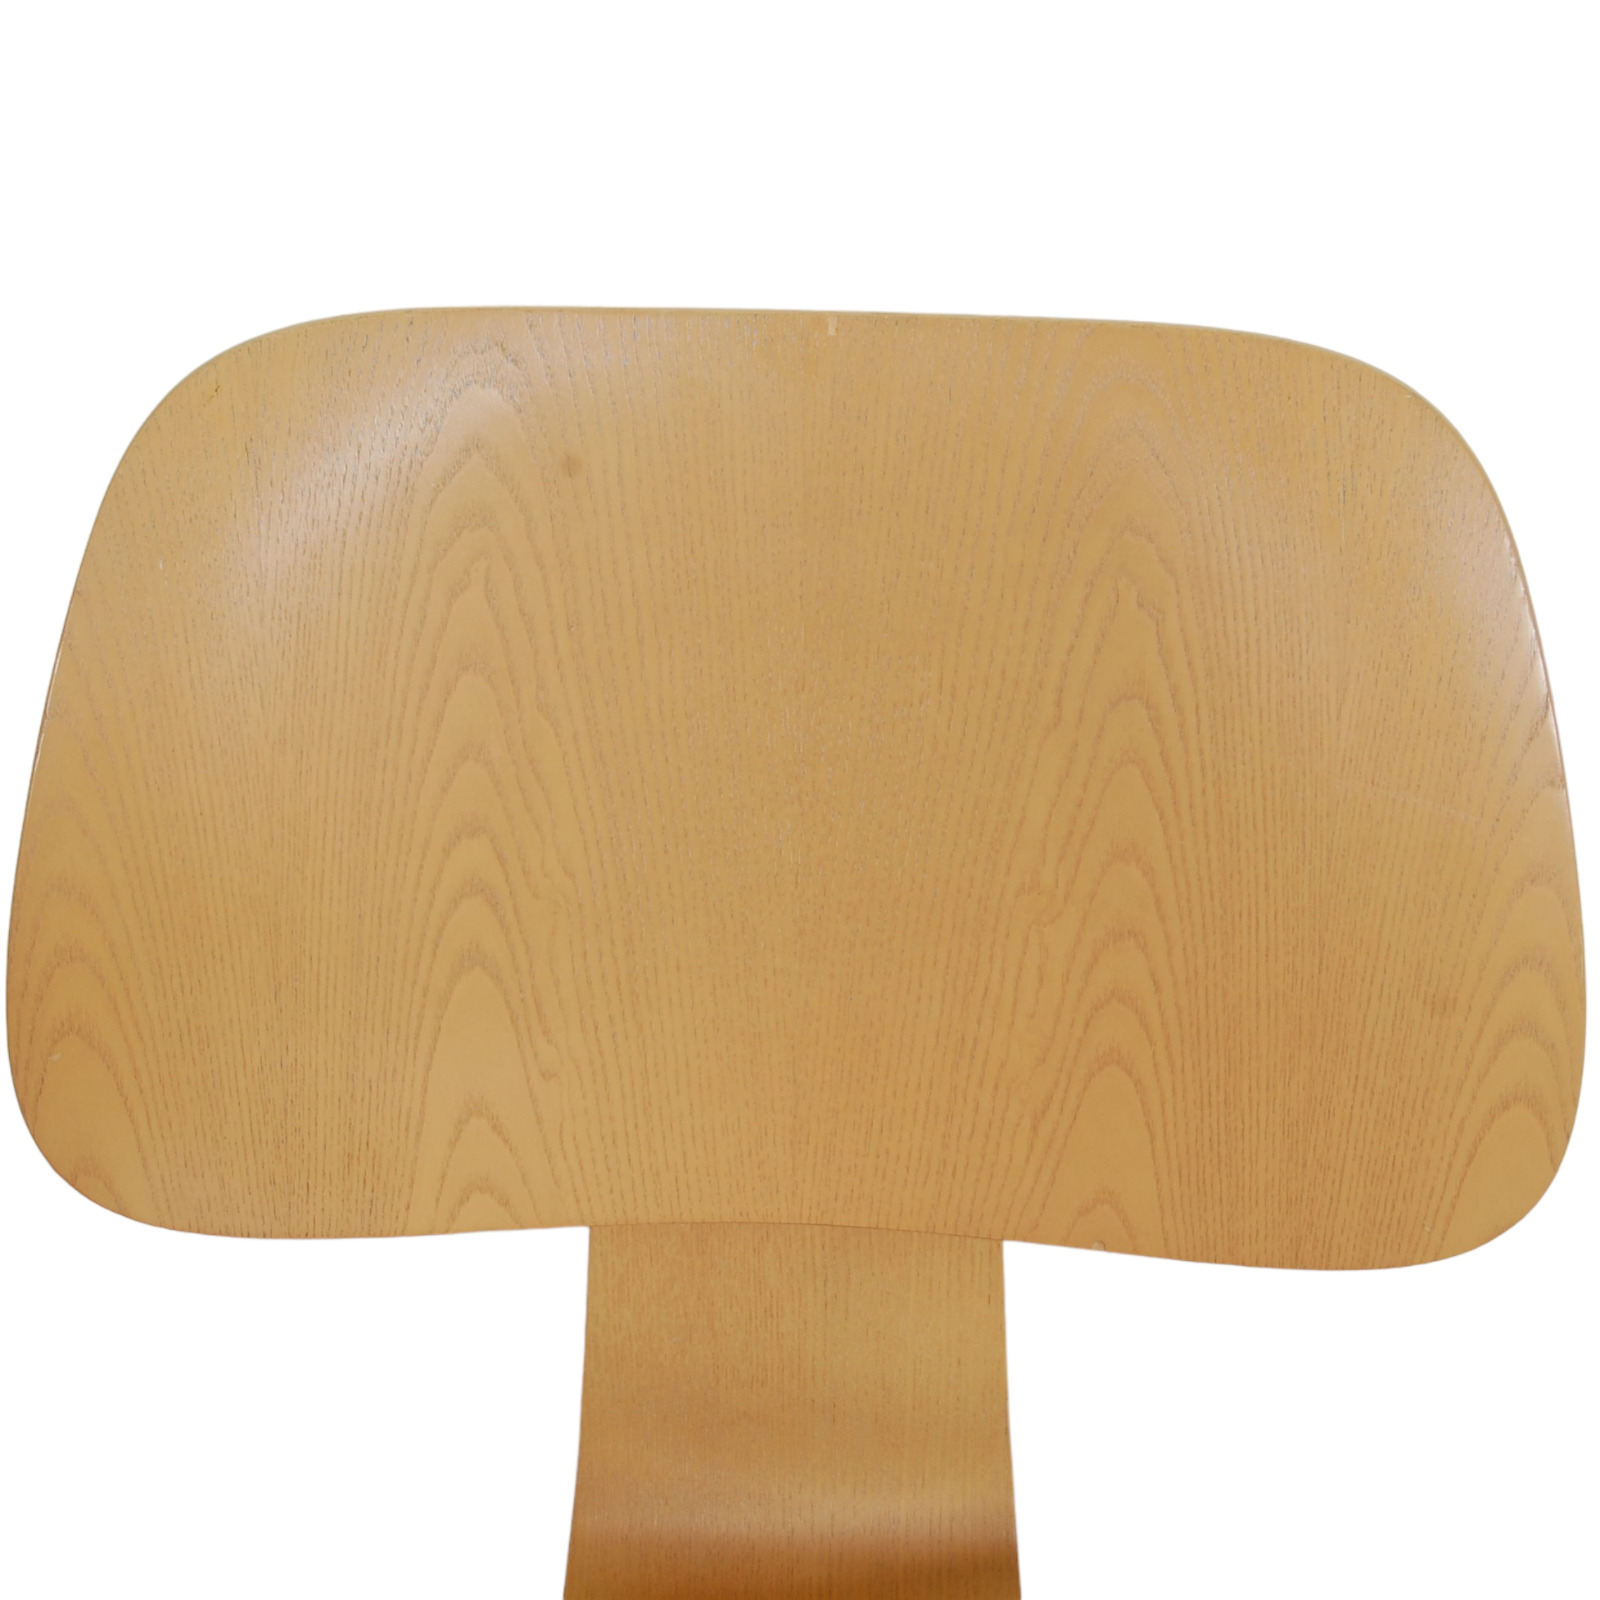 Charles Eames lounge chair model DCW plywood chair by Vitra